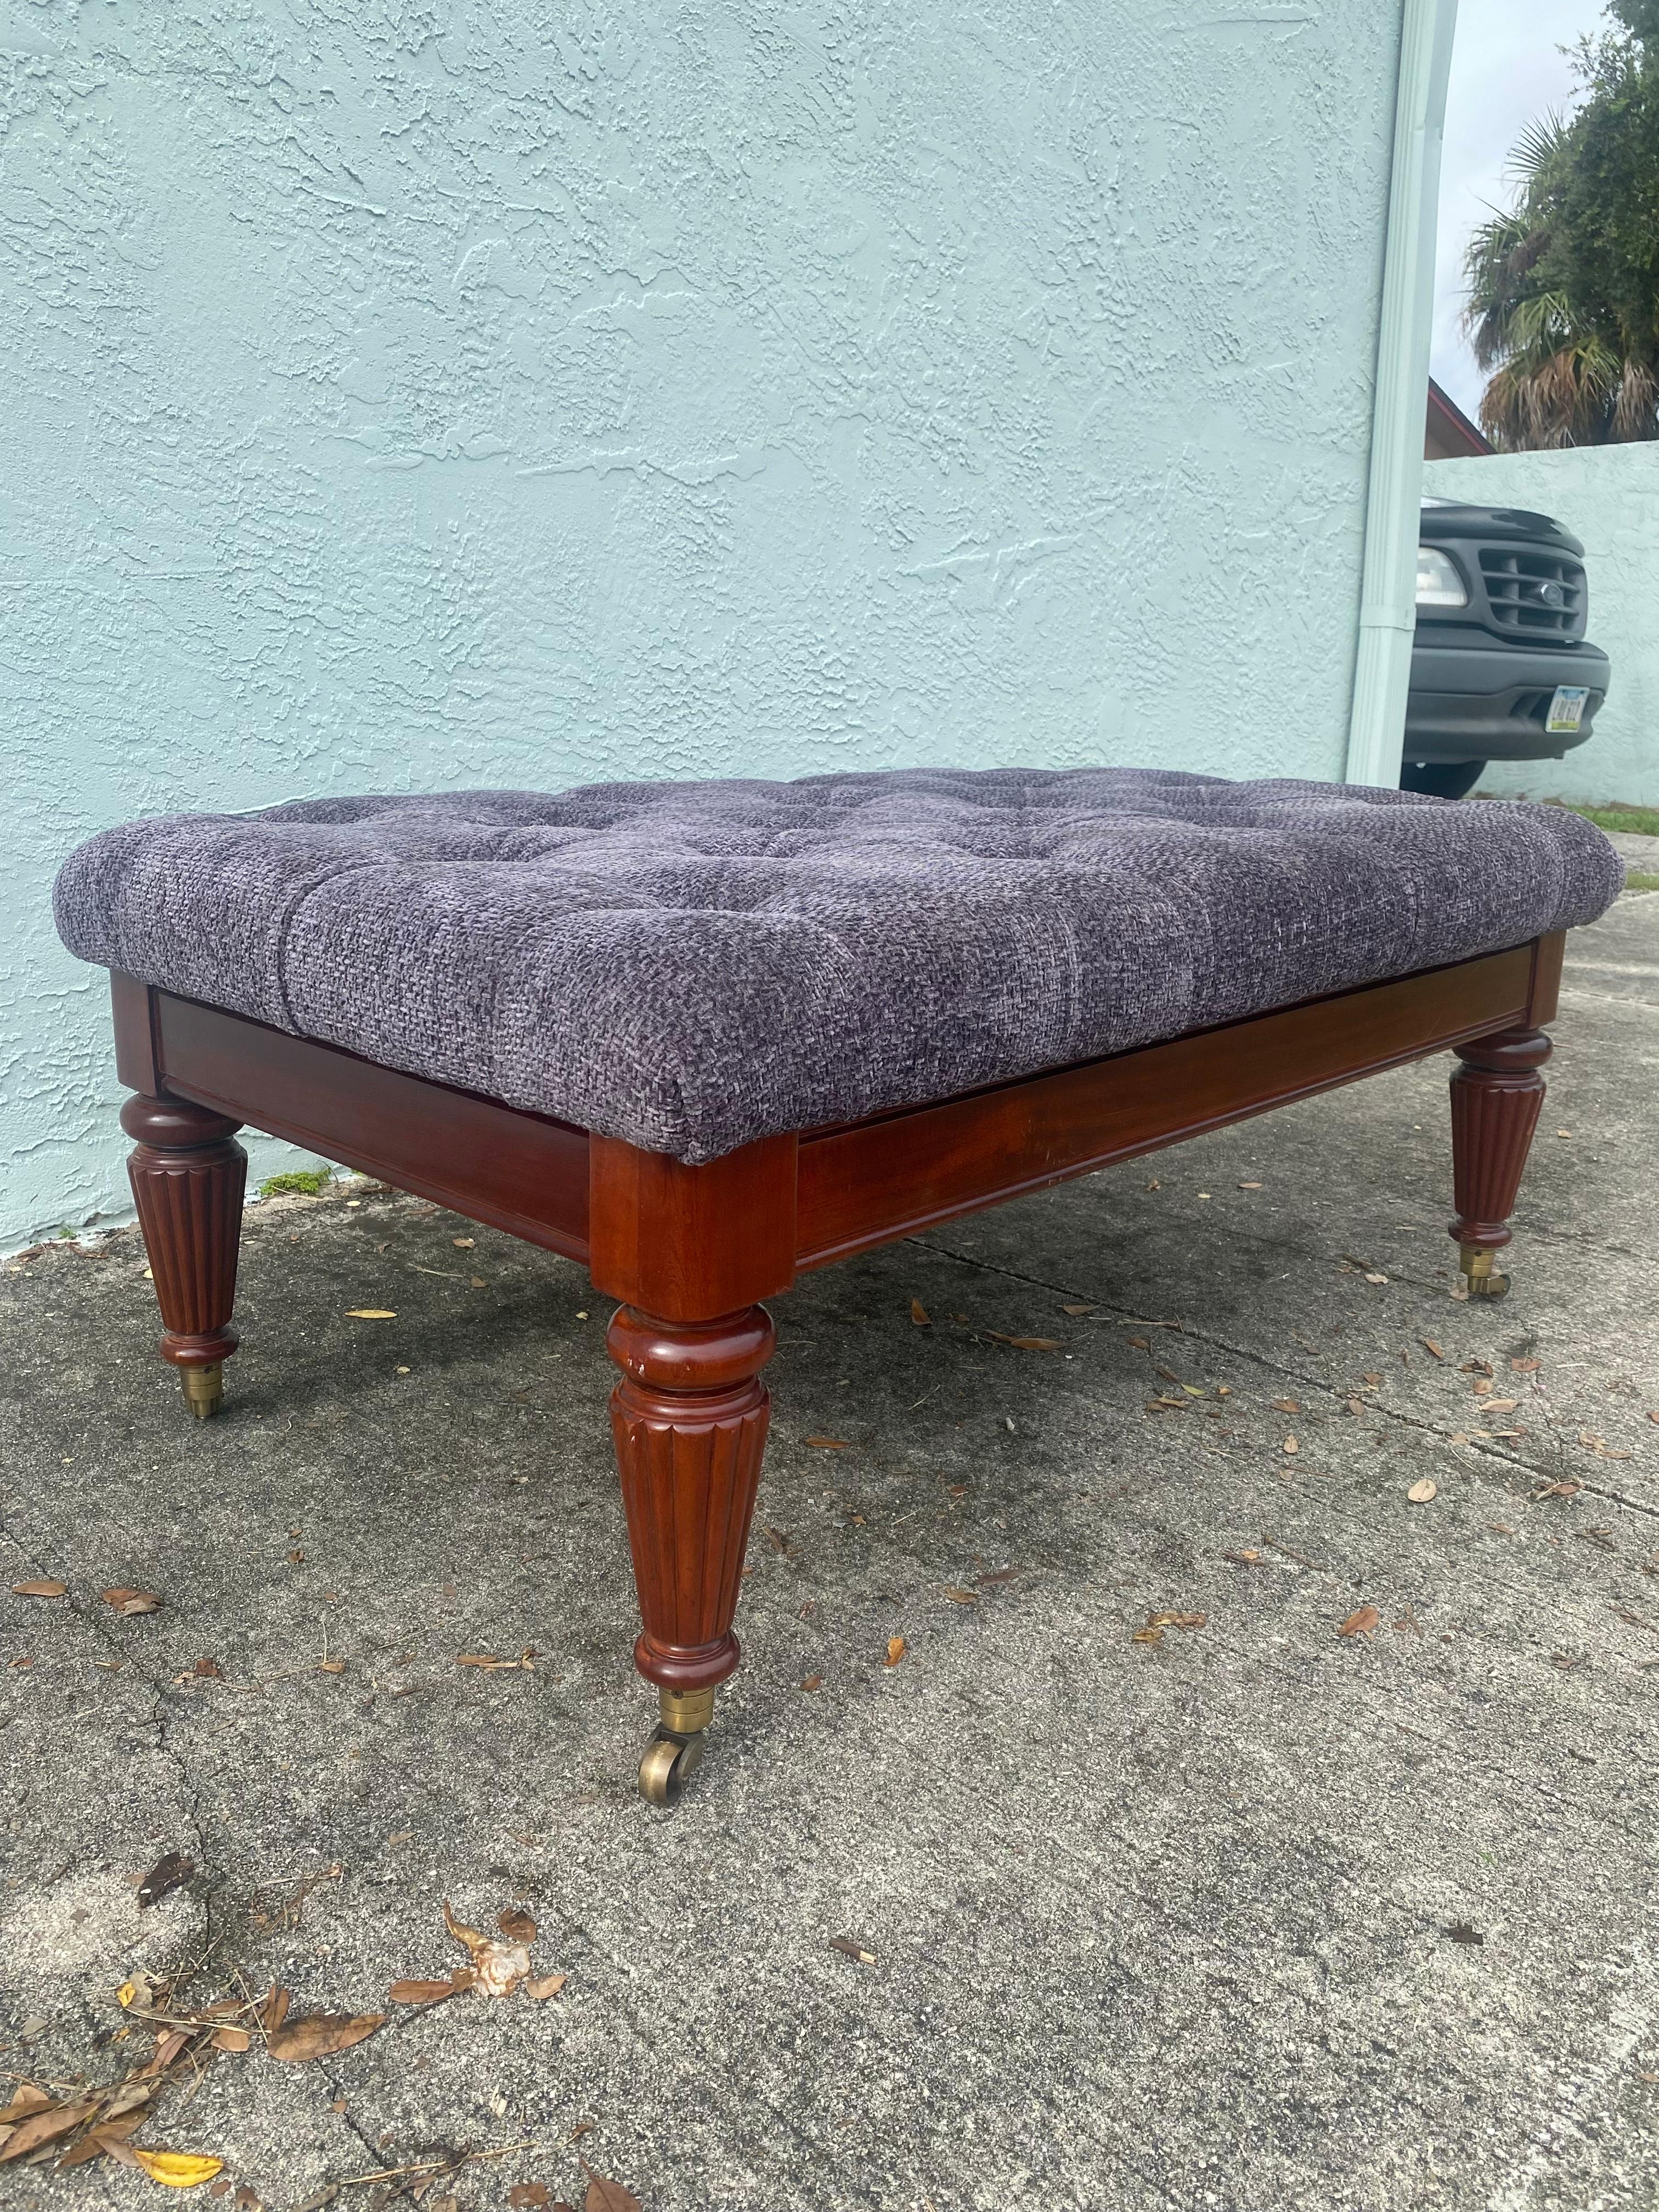 1970s Purple Tweed Tufted Bench Coffee Table Ottoman  In Good Condition For Sale In Fort Lauderdale, FL